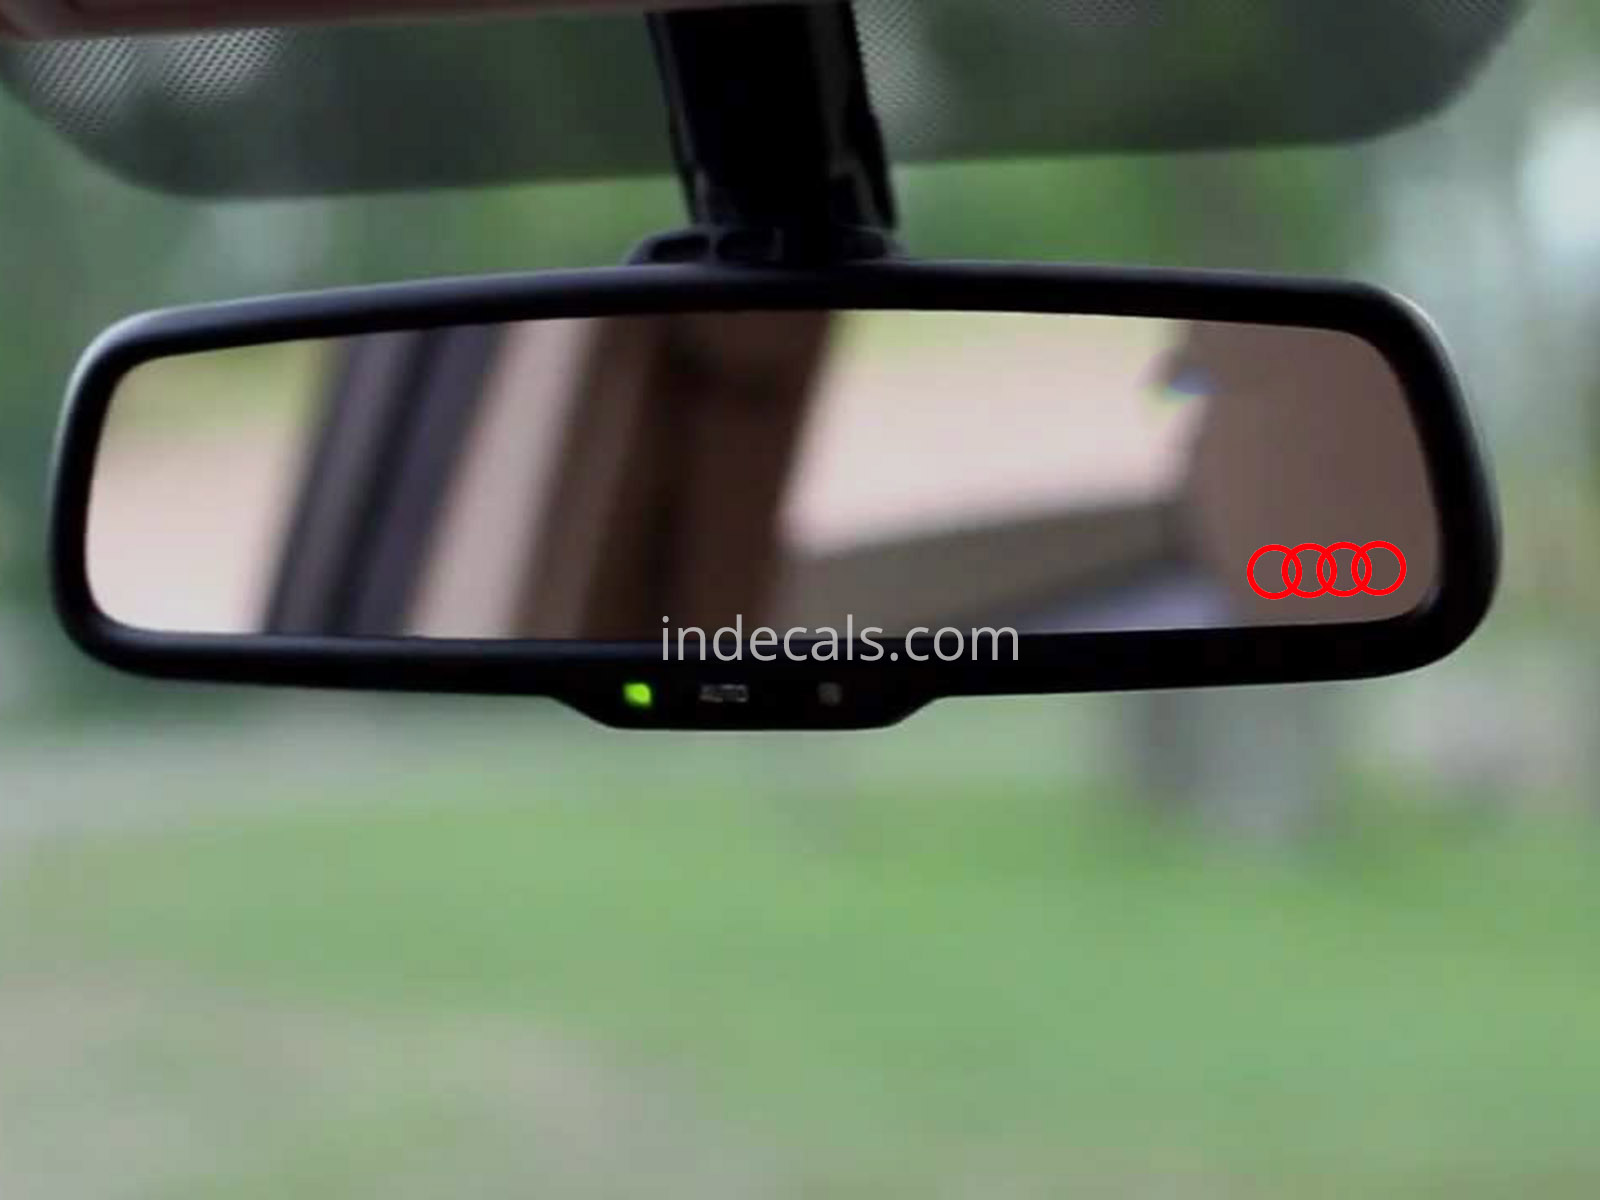 3 x Audi Rings Stickers for Interior Mirror - Red